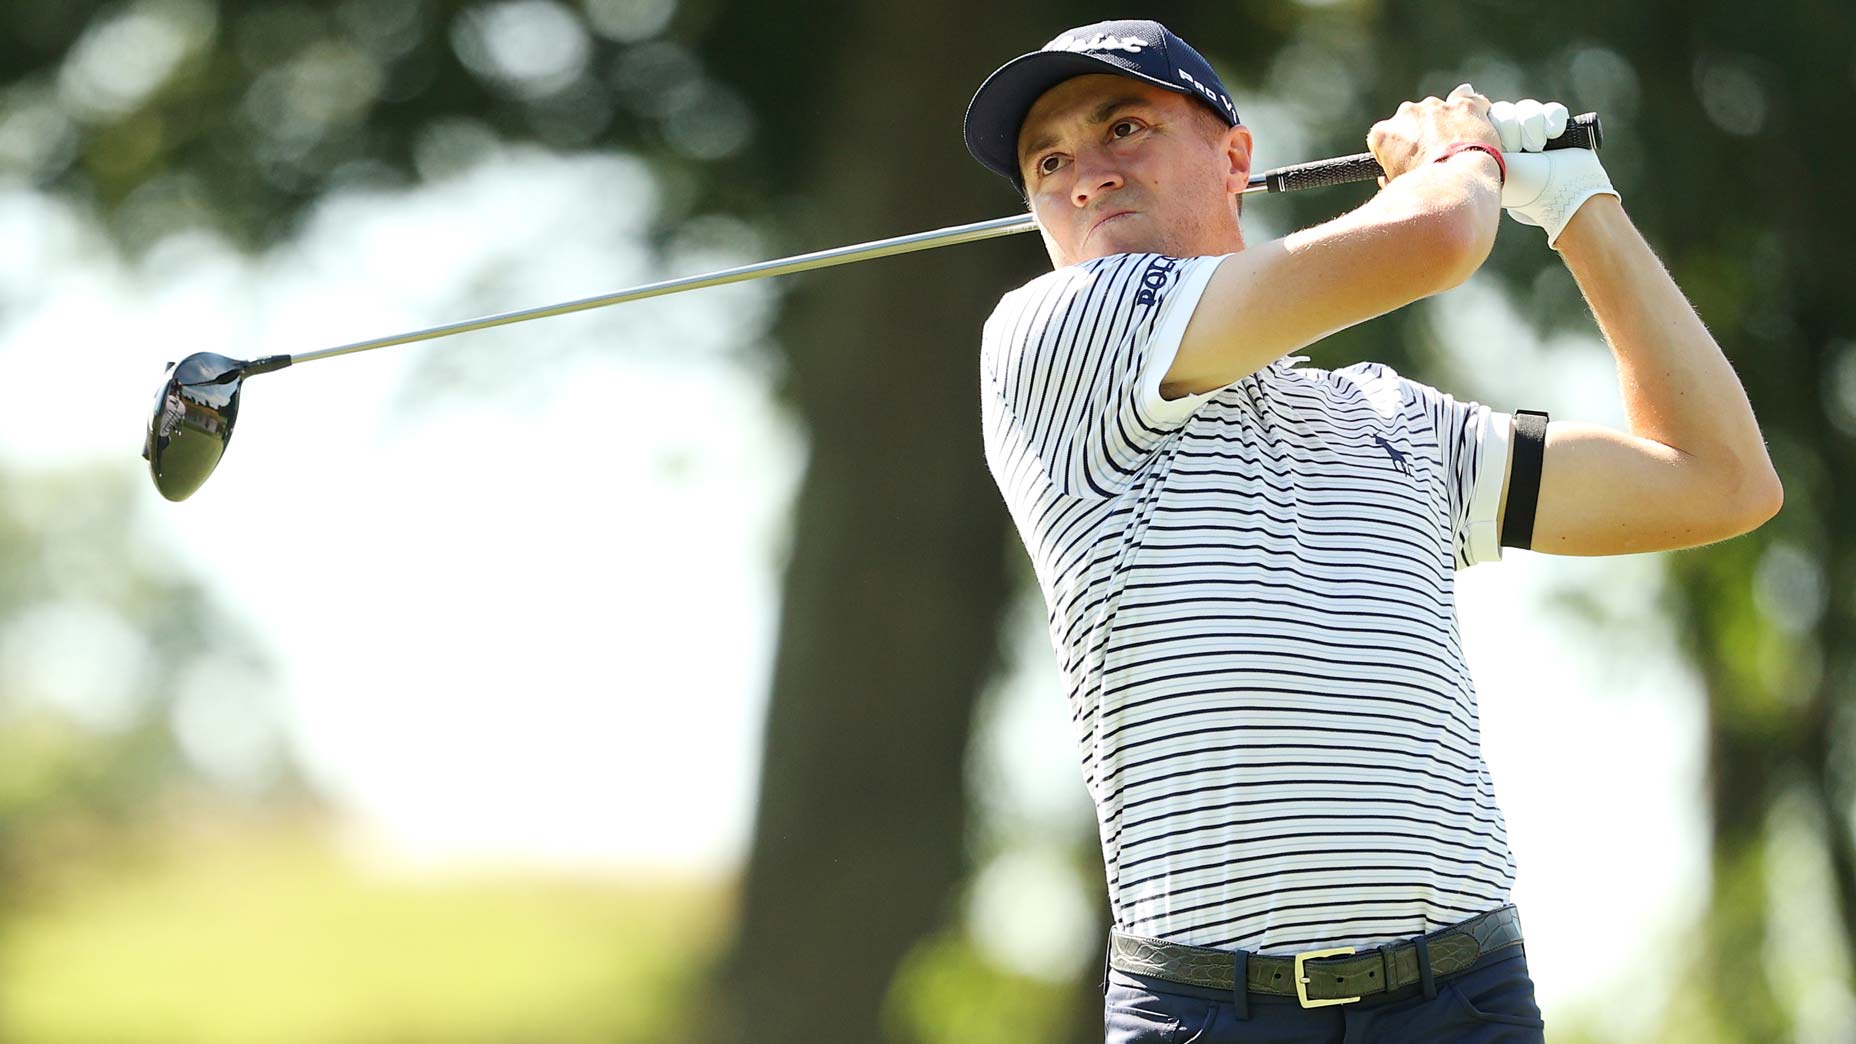 Workday Charity Open odds to win Justin Thomas on top heading to Ohio